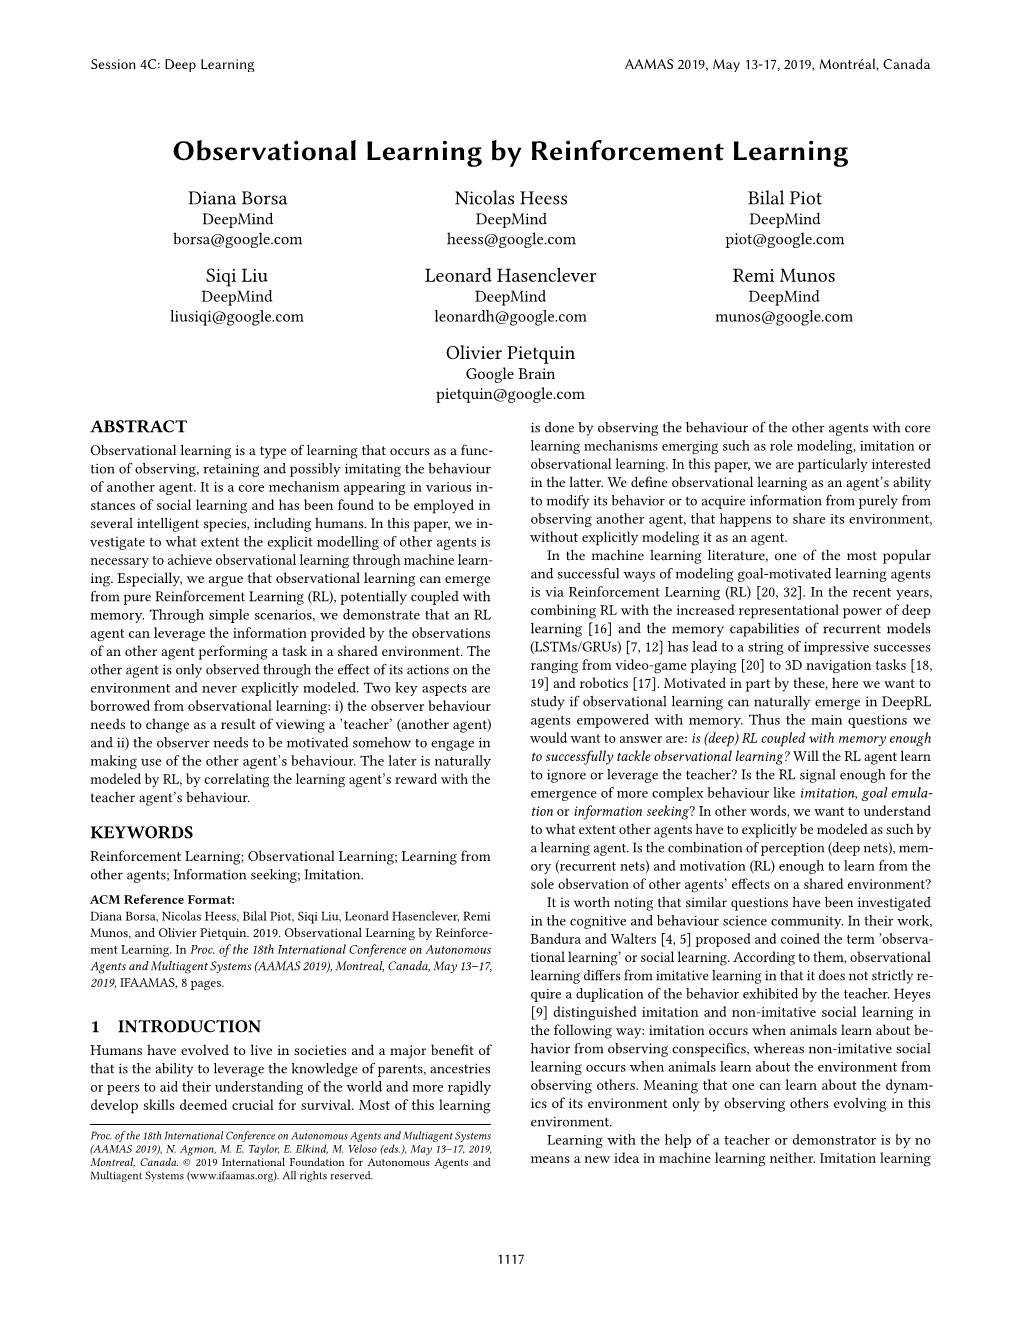 Observational Learning by Reinforcement Learning